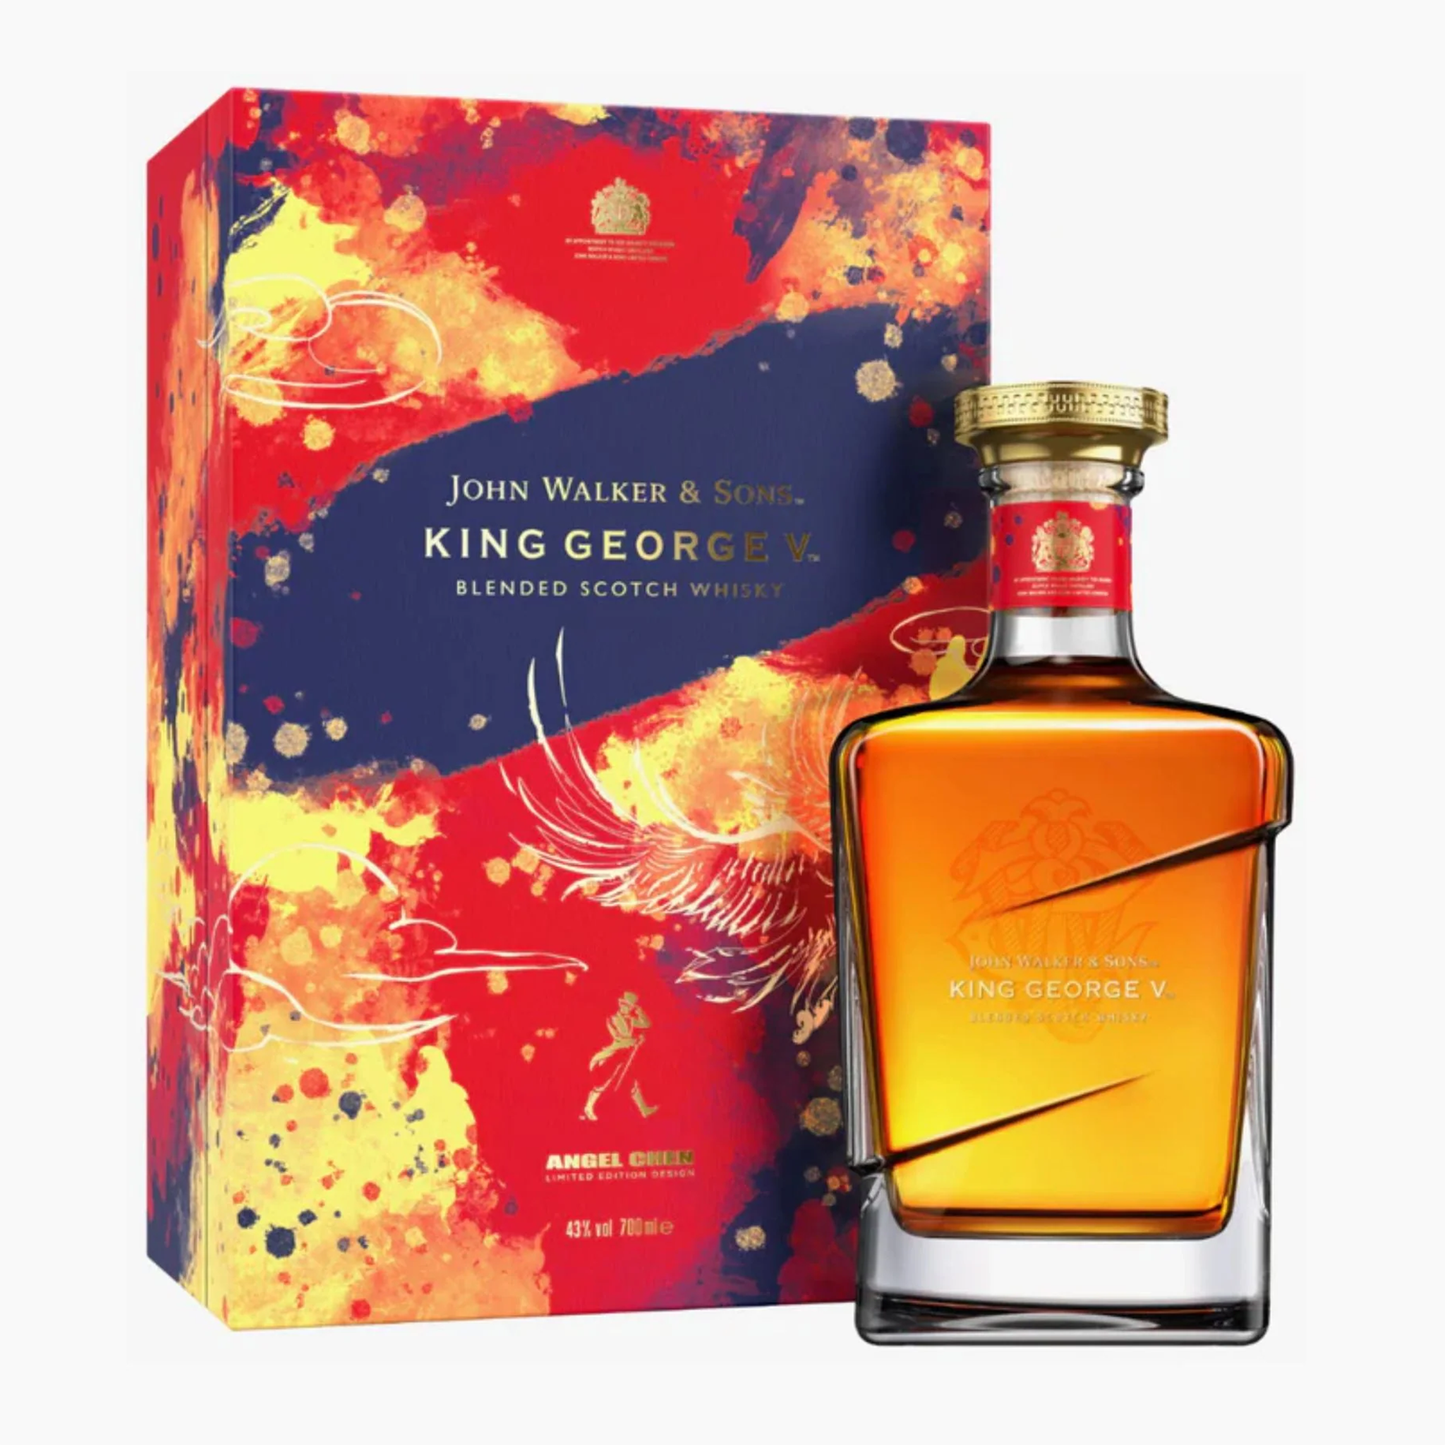 John Walker & Sons King George V Lunar New Year Limited Edition Year of the Rabbit Blended Scotch Whisky 750mL